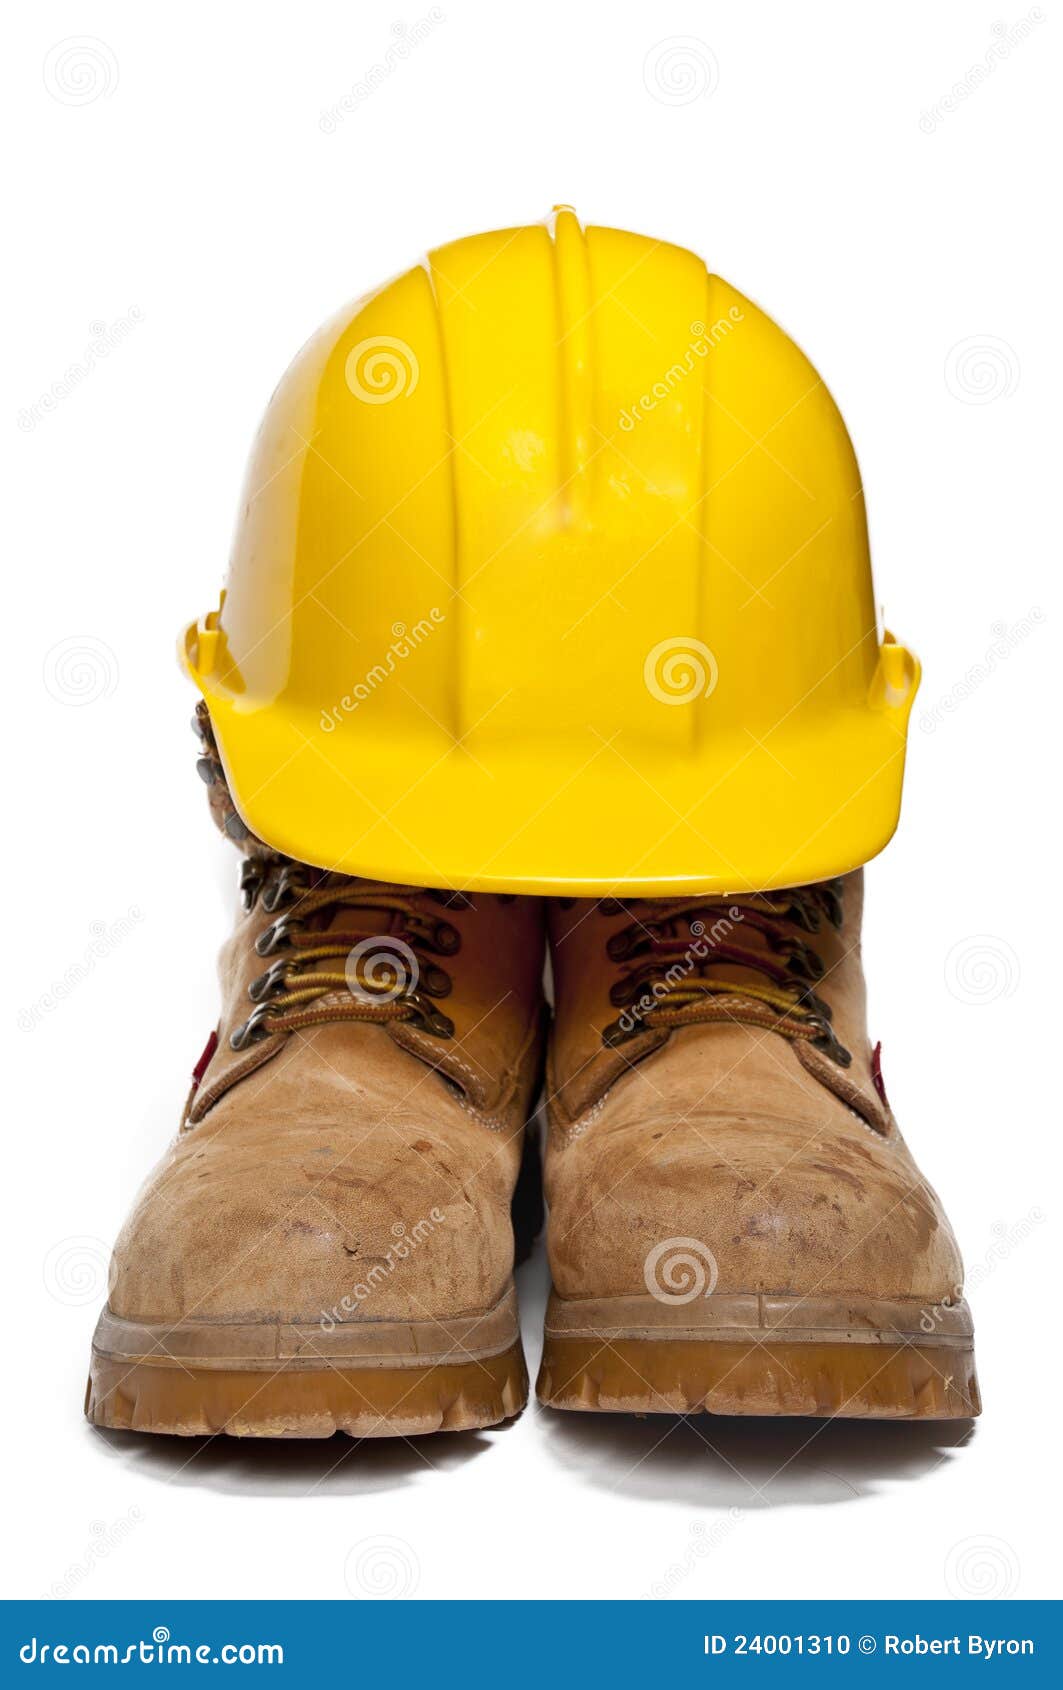 hard hat and work boots